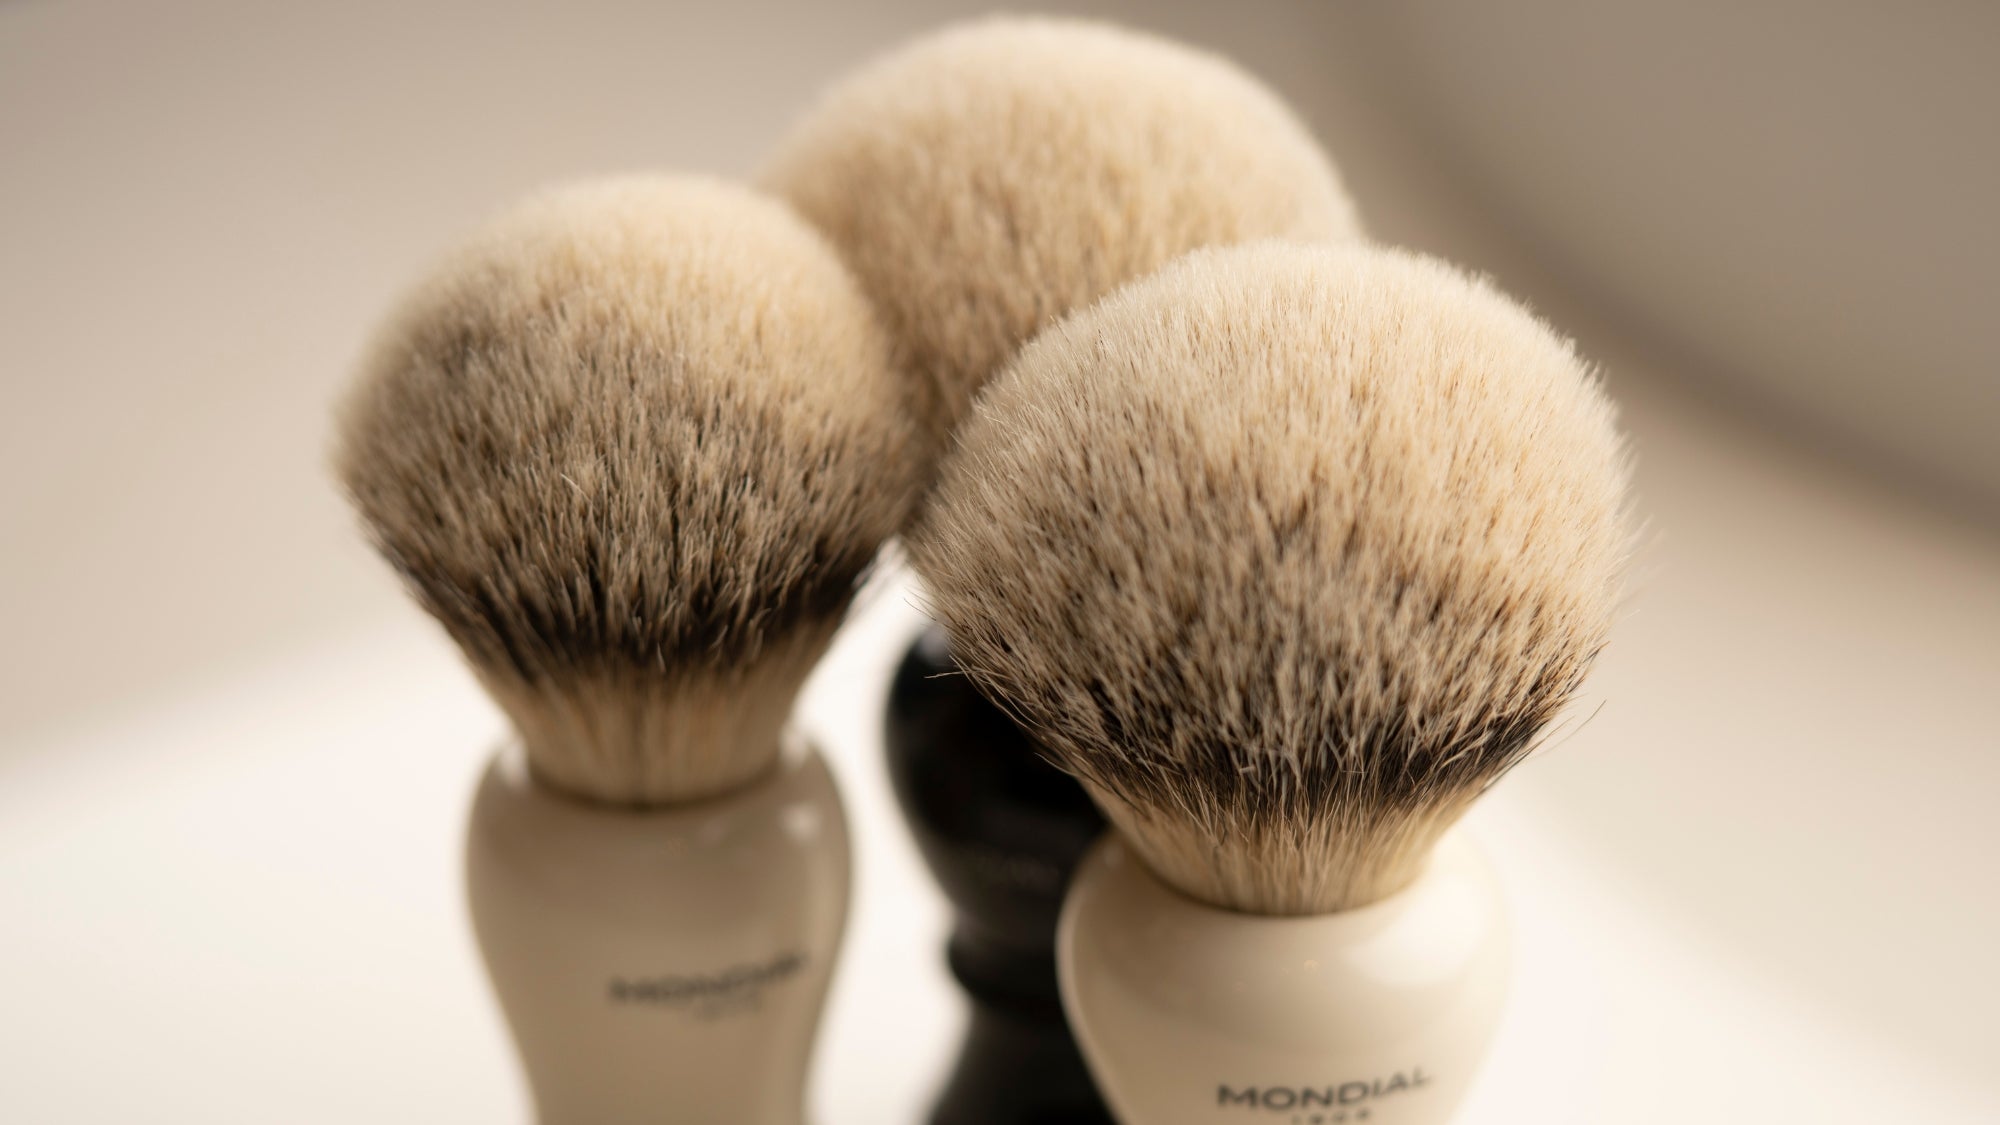 Shaving Brushes with Pure Natural Badger